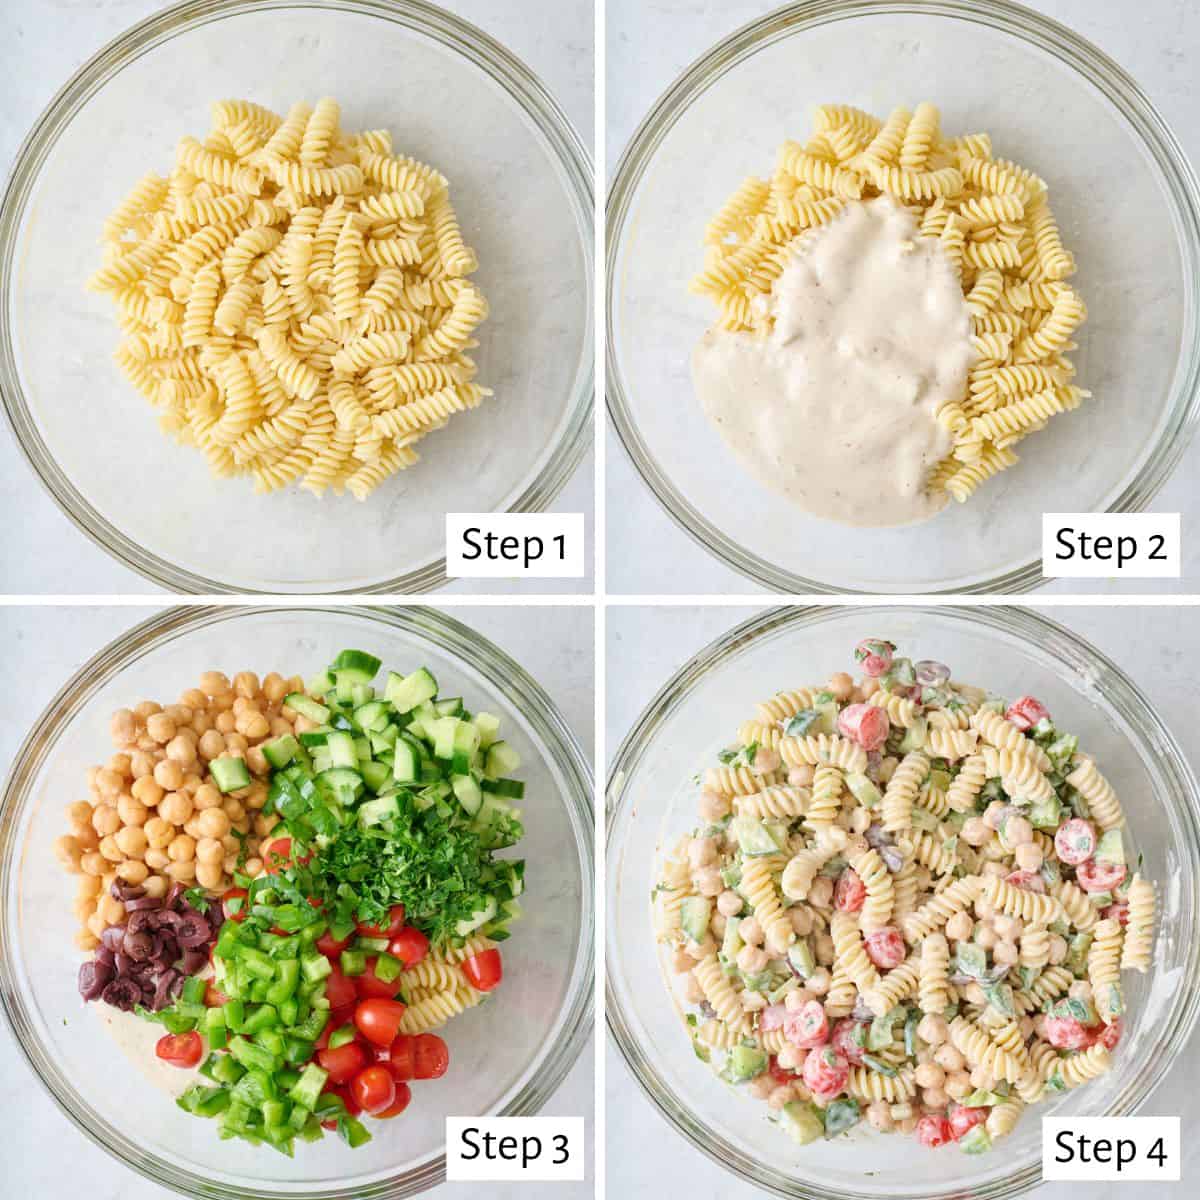 4-image collage of making the recipe: 1 - Cooked pasta in a bowl; 2 - Dressing added before mixing; 3 - Chickpeas, cucumbers, tomatoes, olives, and parsley added; 4 - After tossing together.